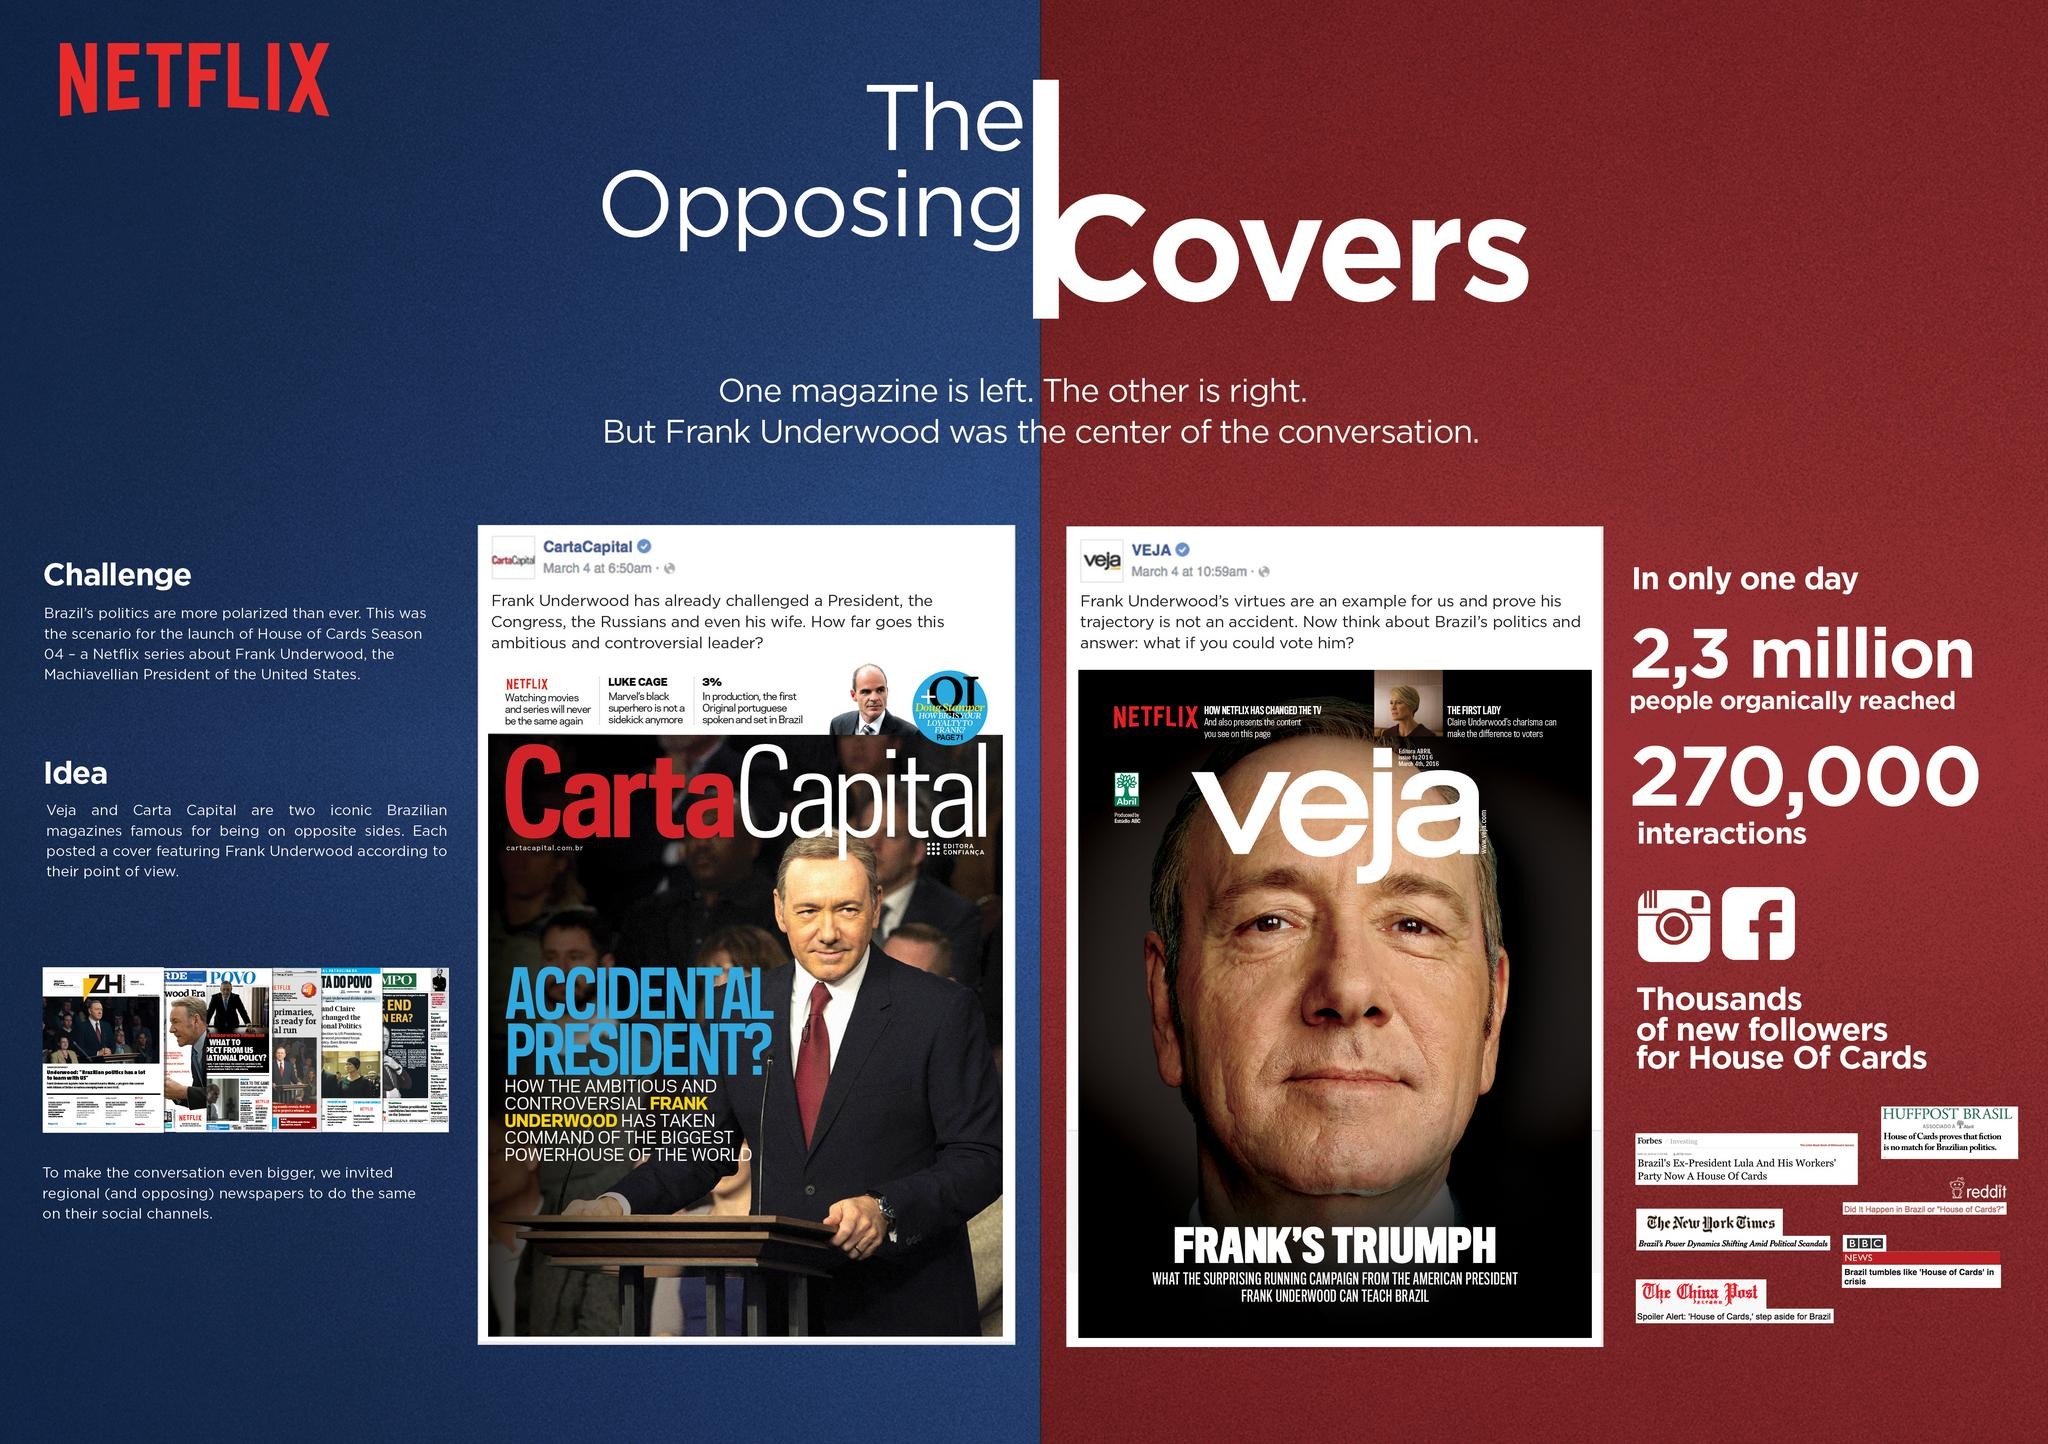 The Opposing Covers